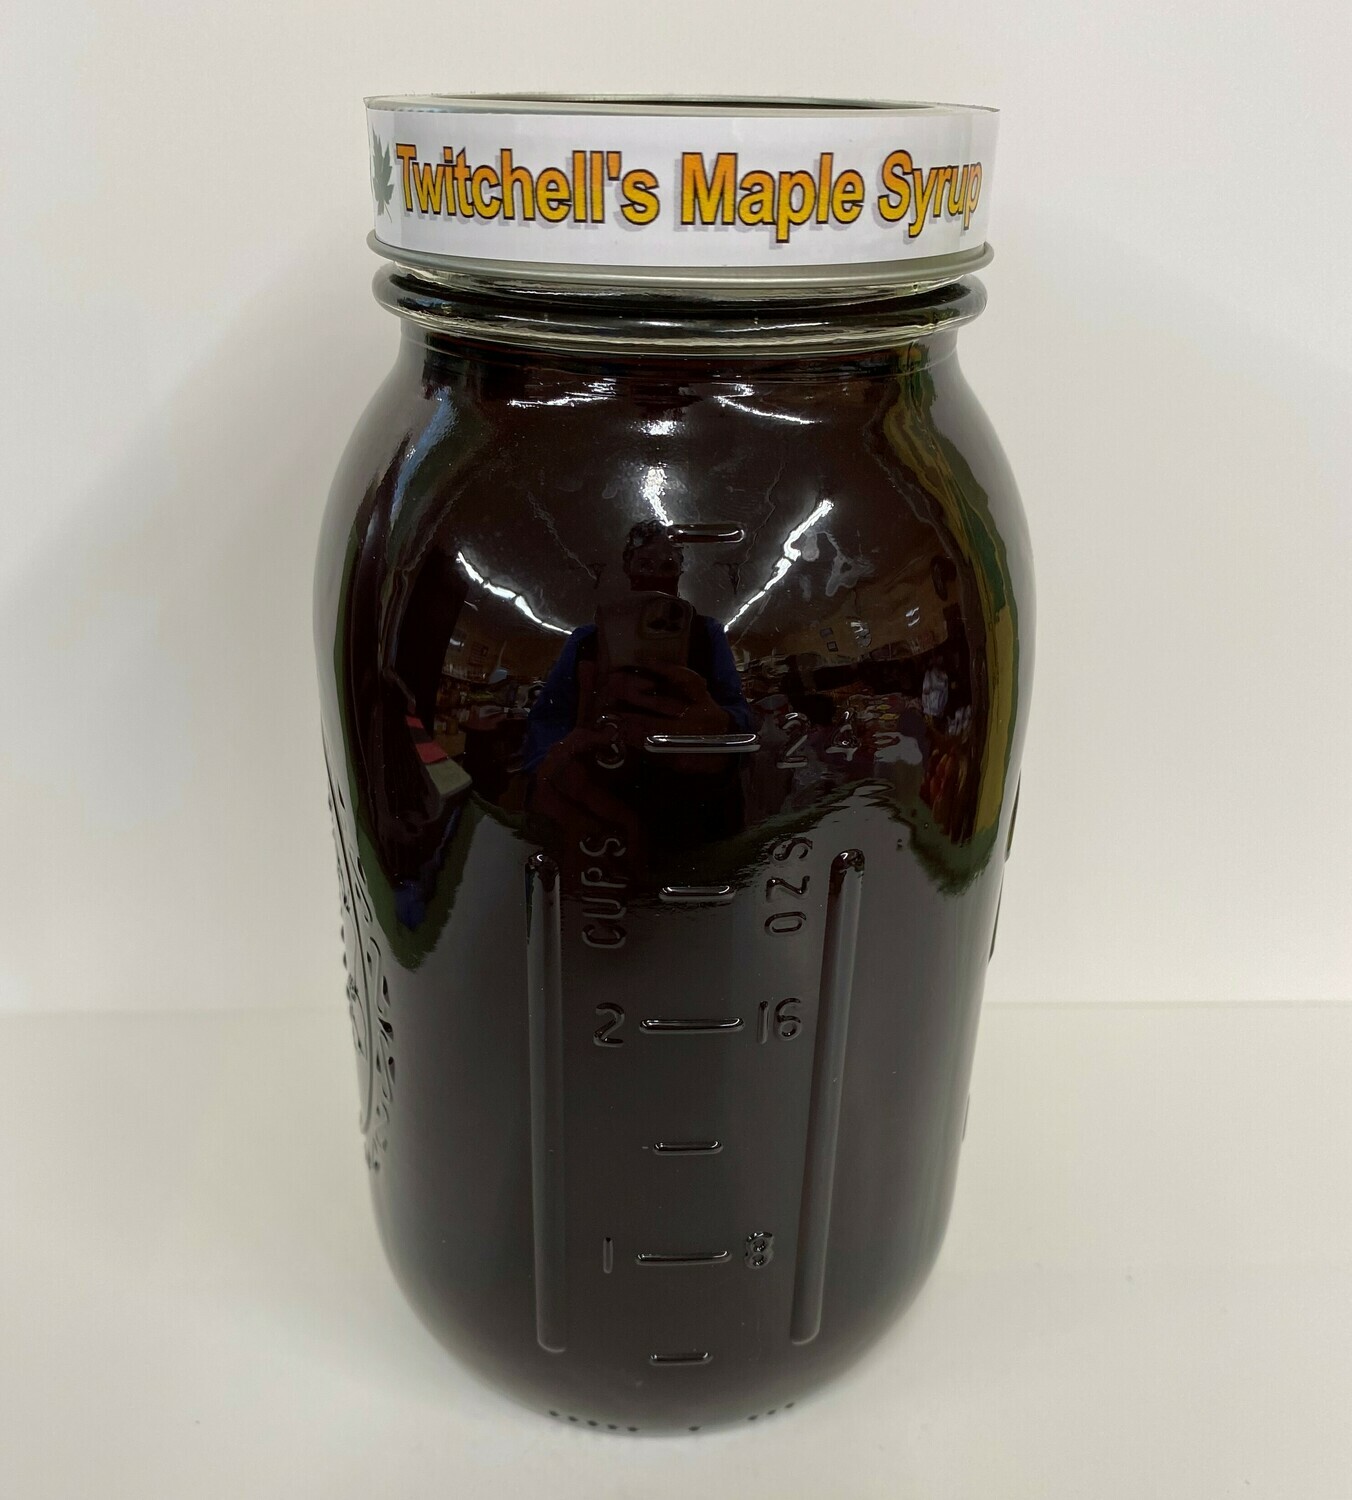 Twitchell's Sugarhouse - Maine Maple Syrup - Quart